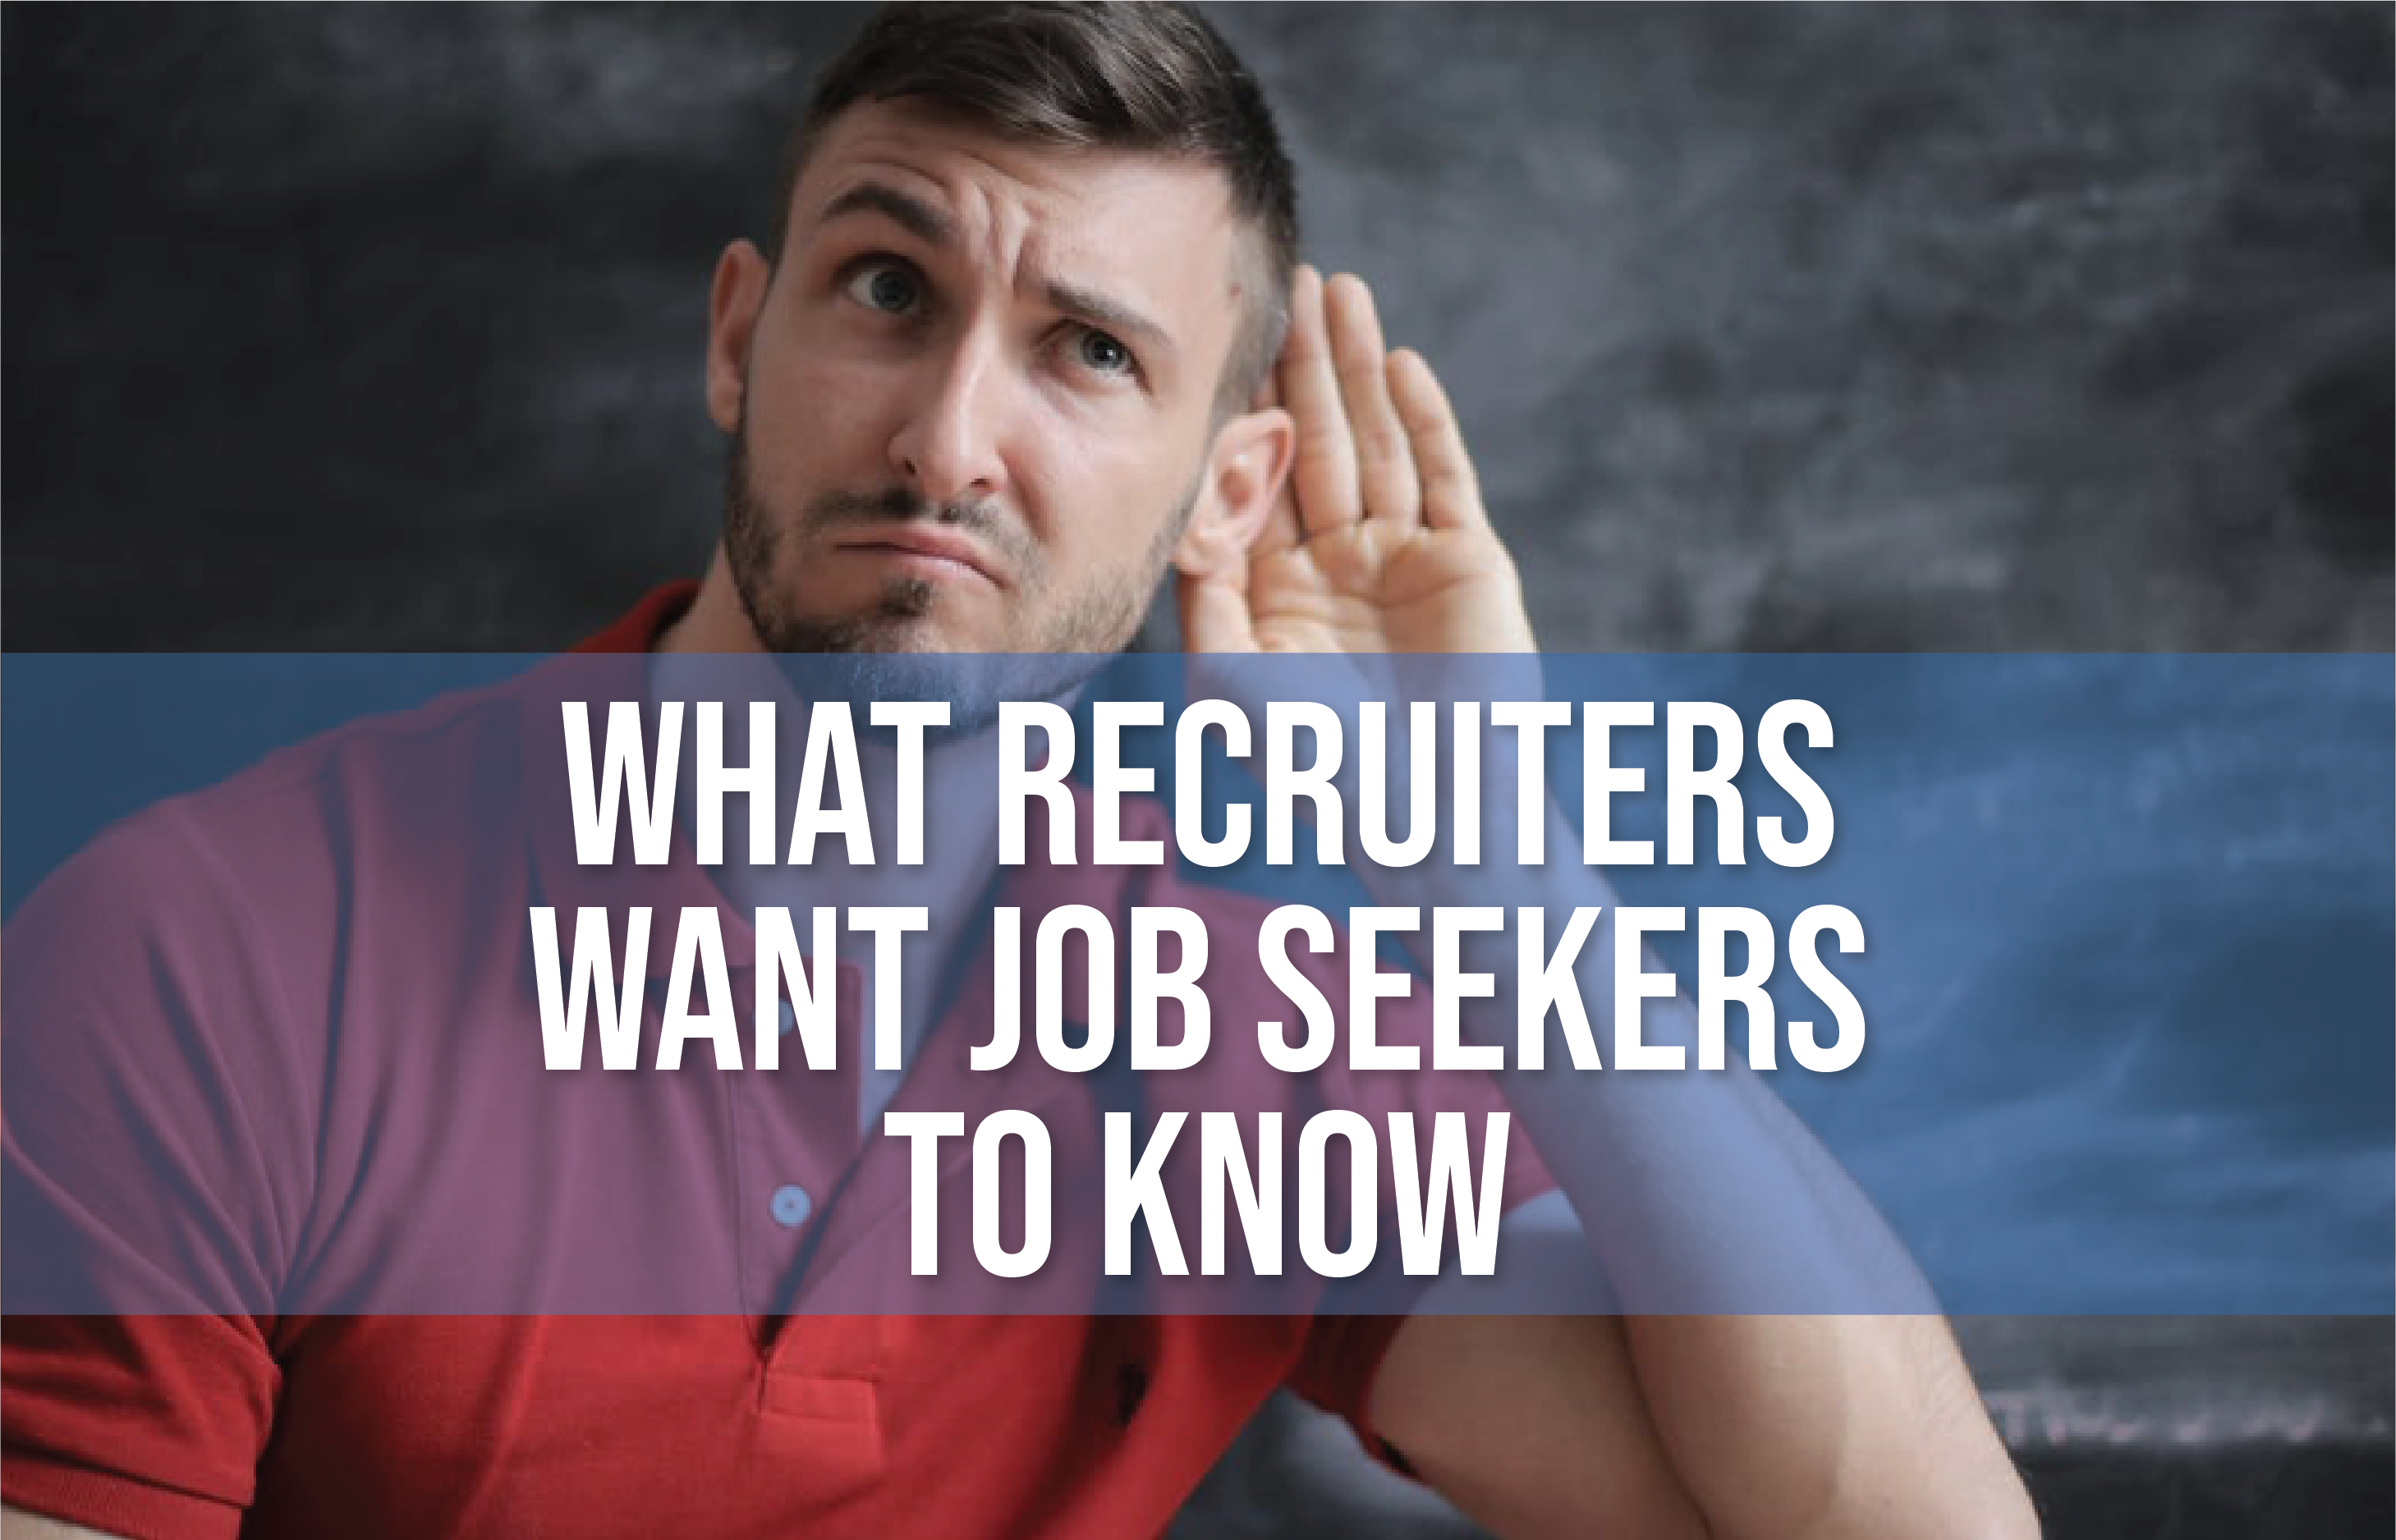 What recruiters want job seekers to know